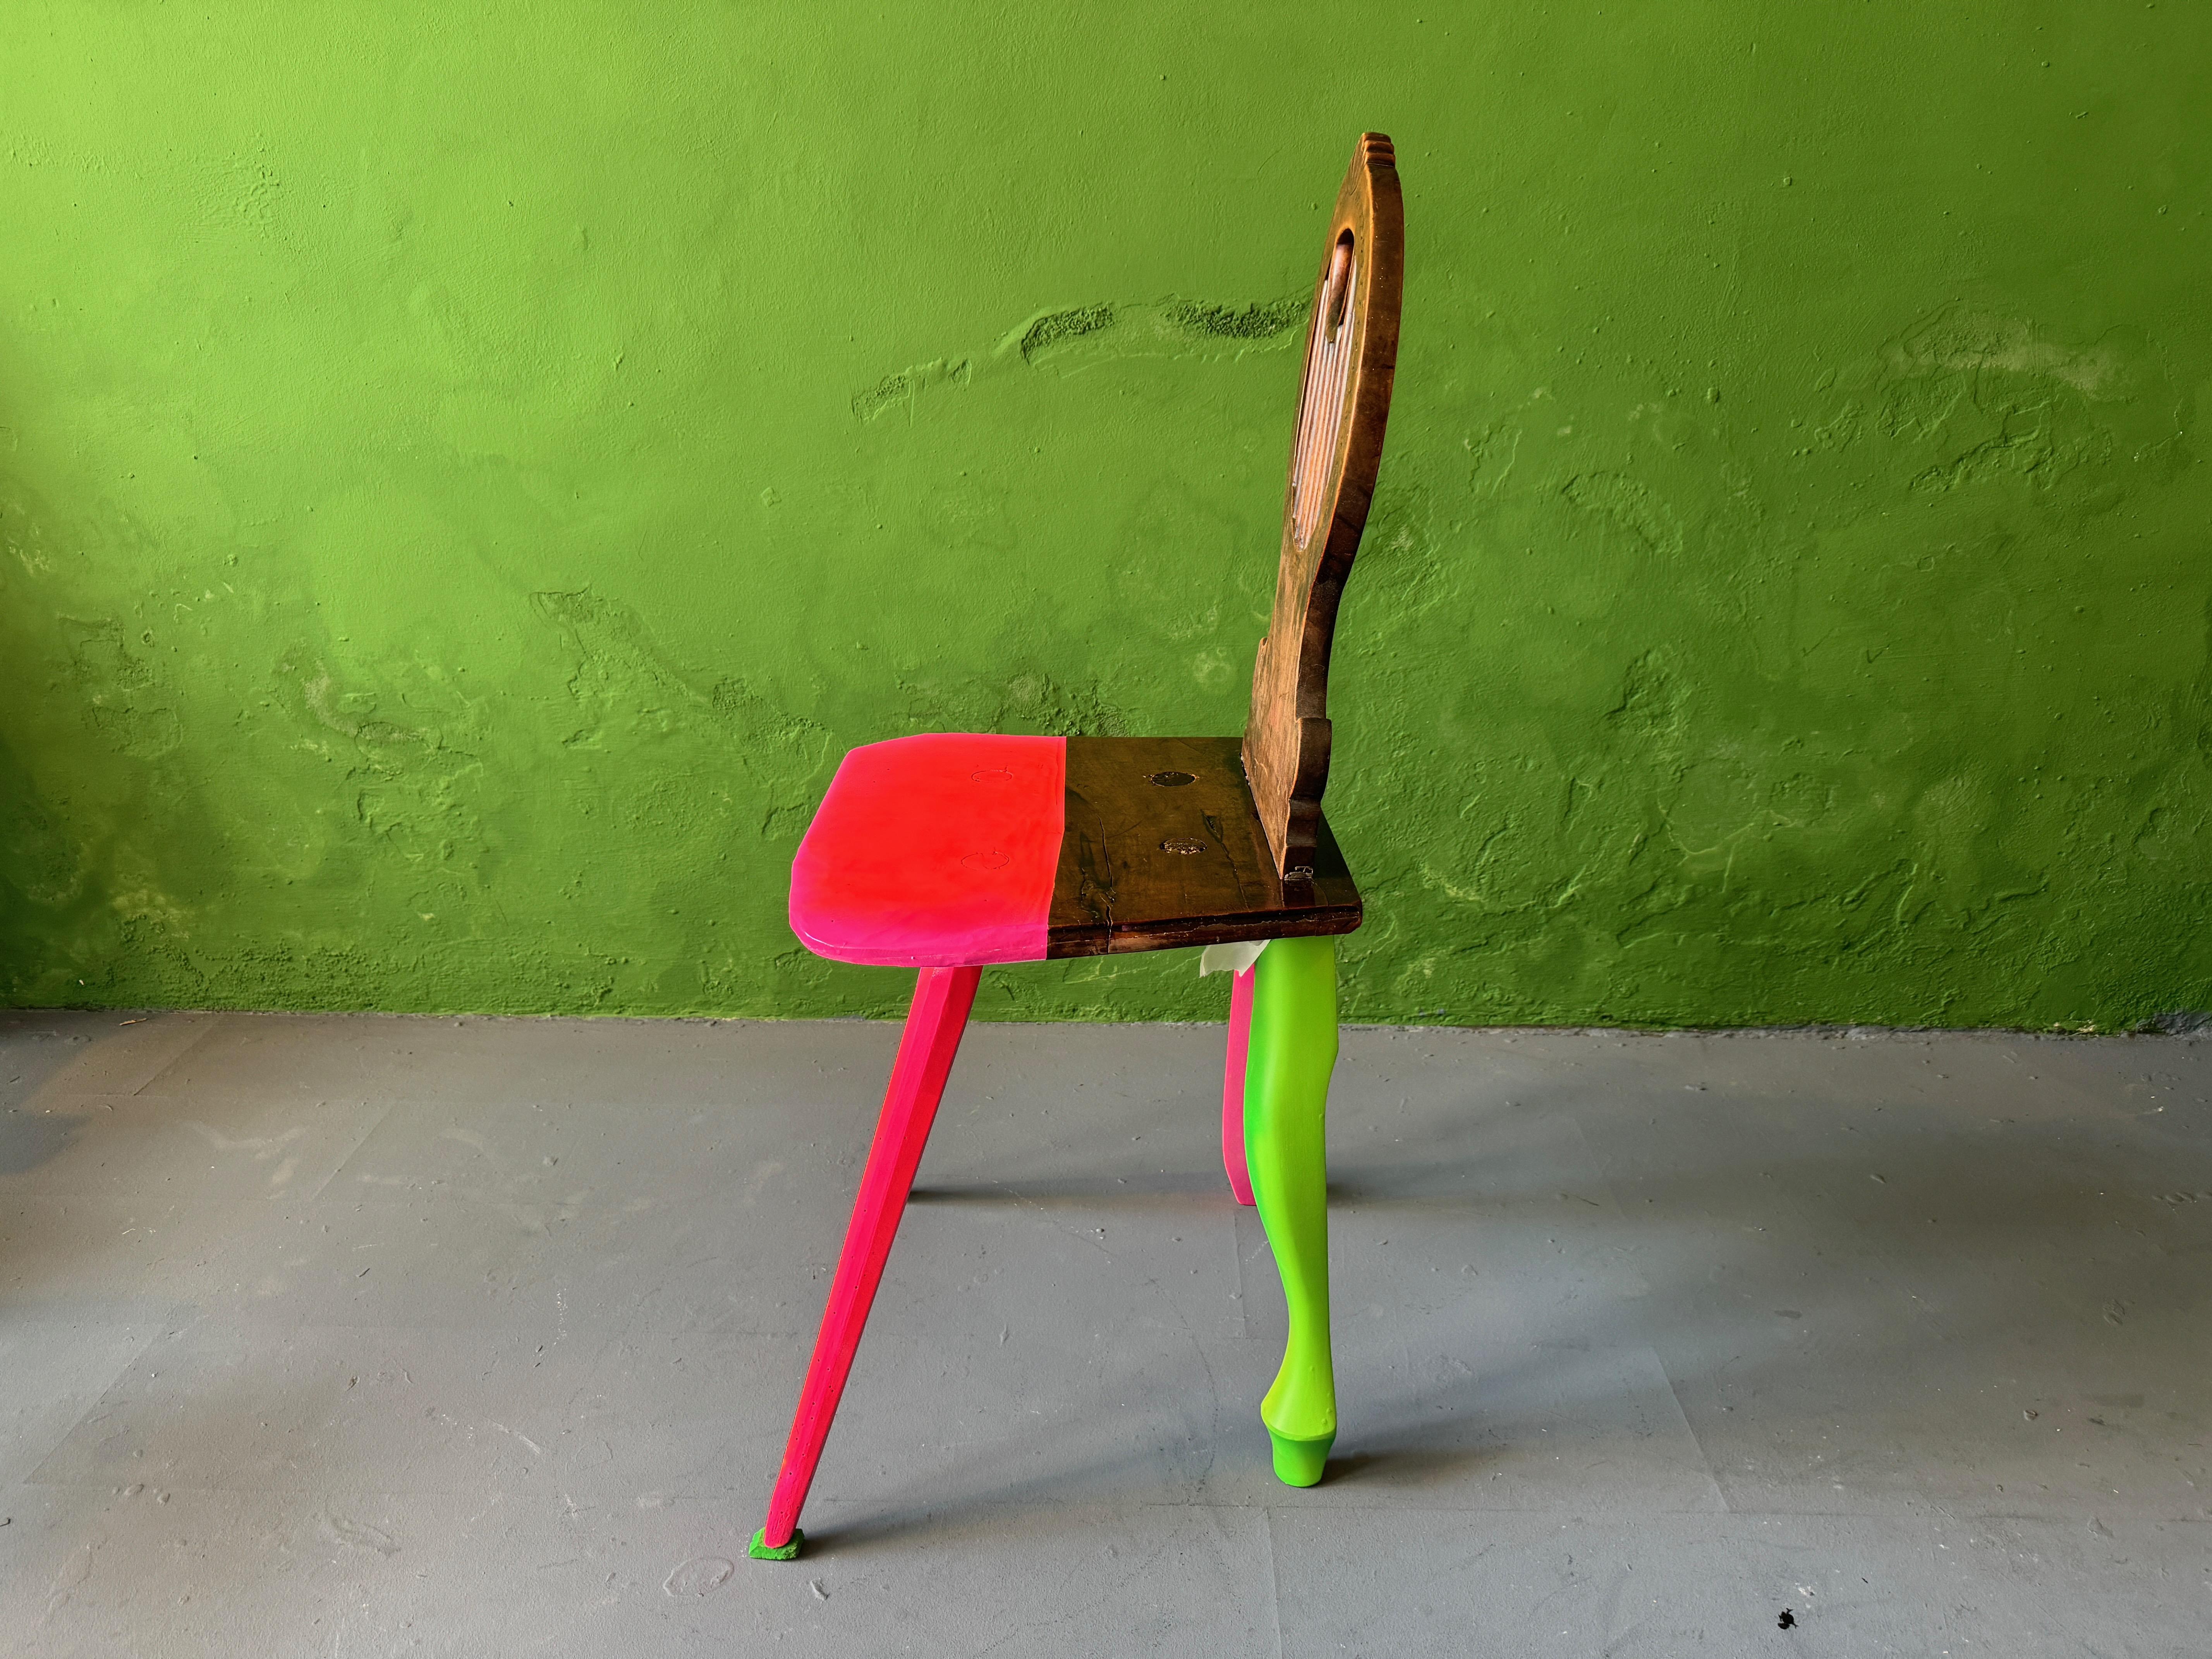 German Contemporized Farnchair by Markus Friedrich Staab For Sale